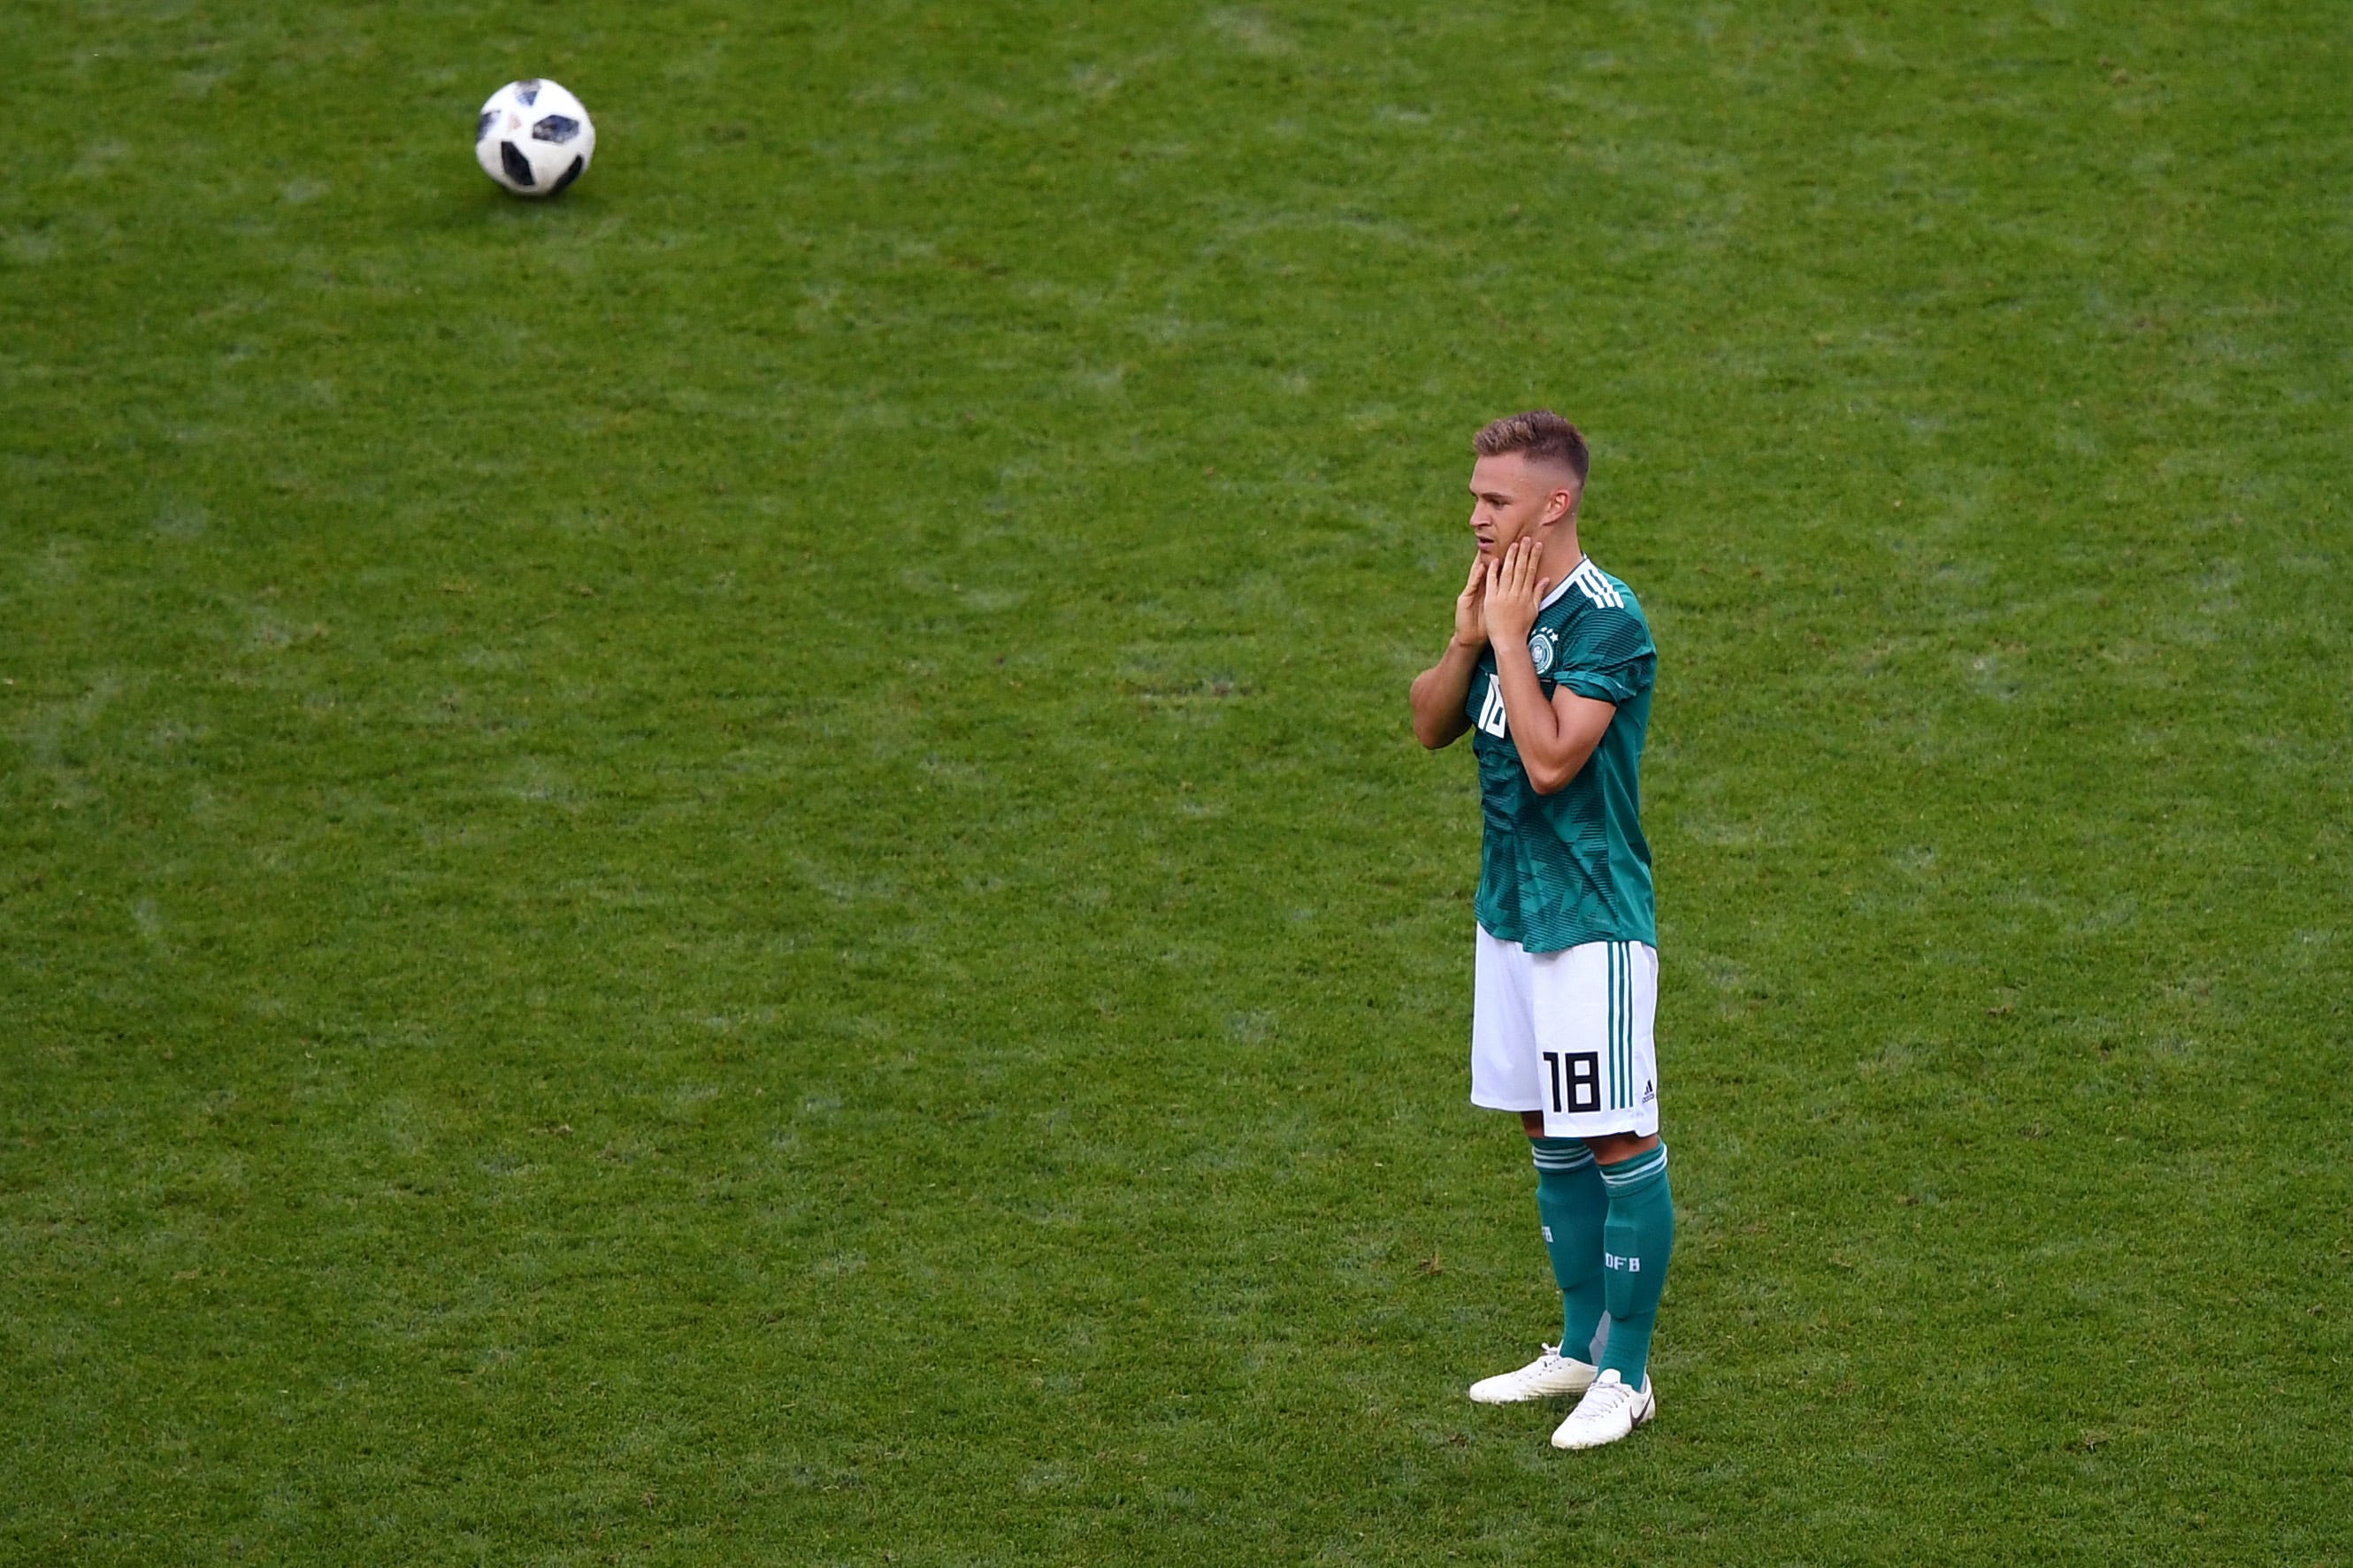 Joshua Kimmich disappointed 2018